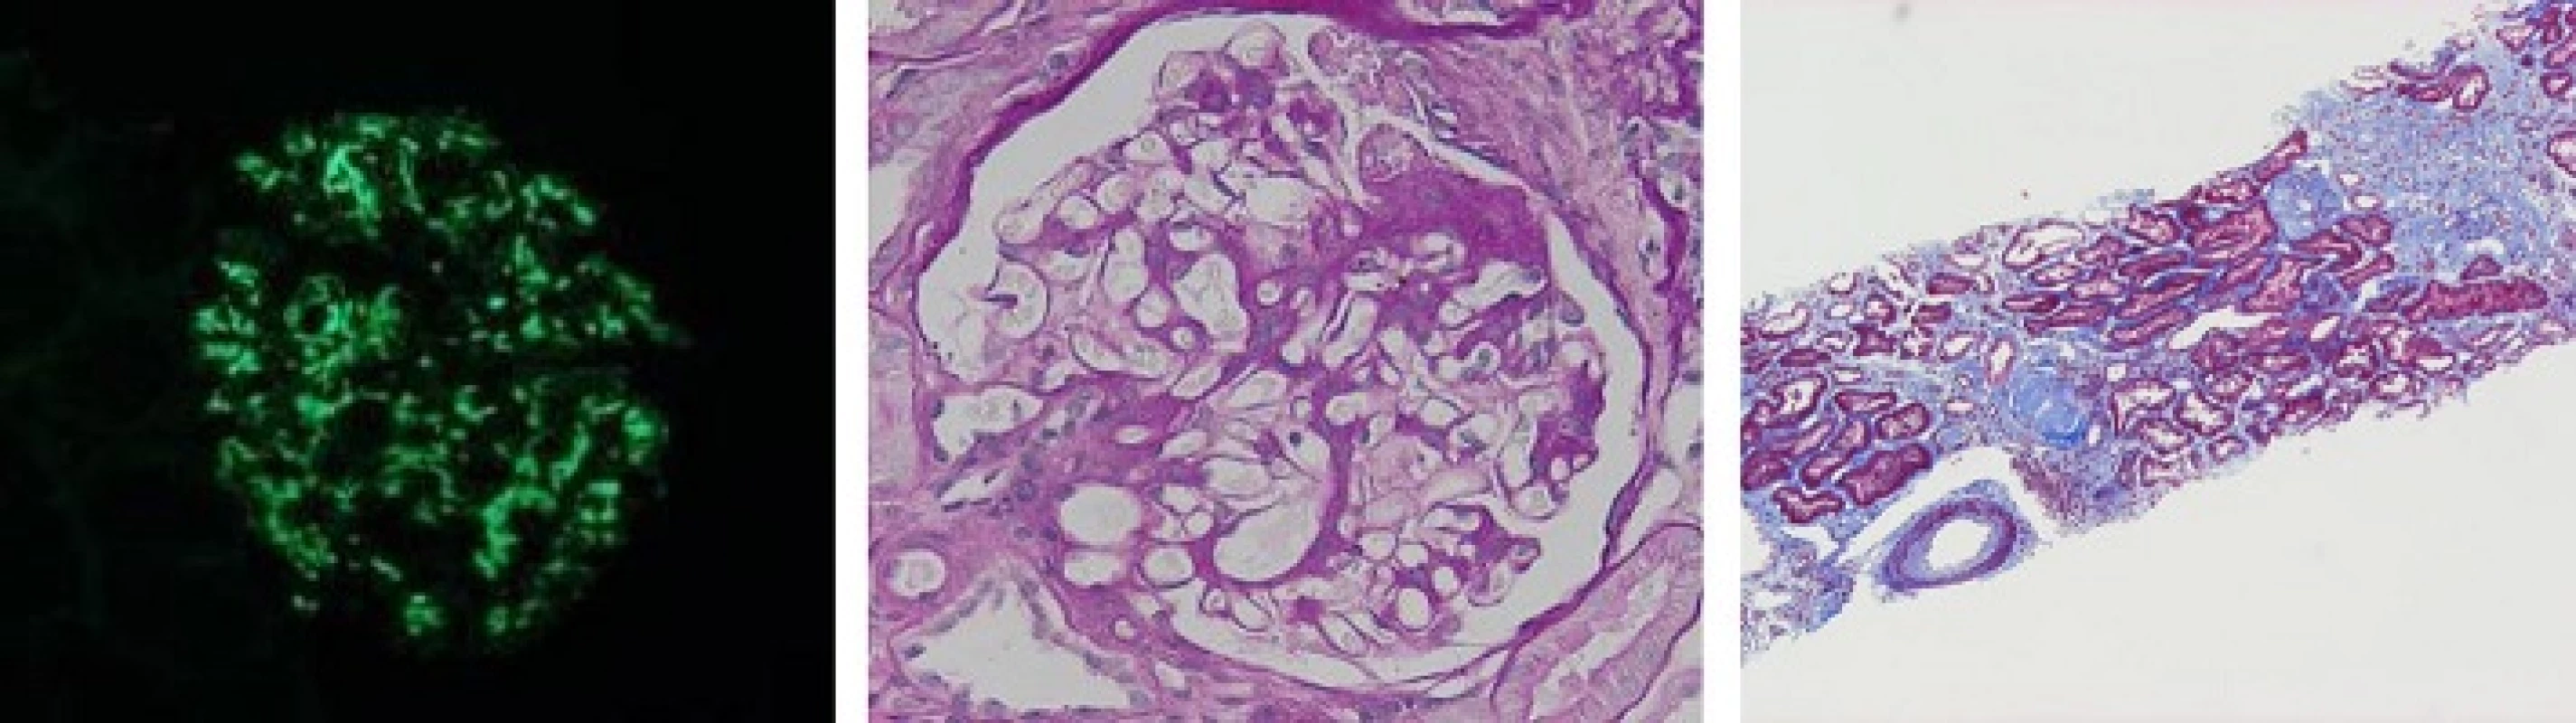 Histological findings of the renal tissues. a IgA, (b) Mesangial matrix expansion and fibrocellular crescent formations were observed in glomeruli with periodic acid-Schiff (PAS) staining (400×). c Slight changes of interstitial fibrosis and arteriole sclerosis with Masson staining (40×)